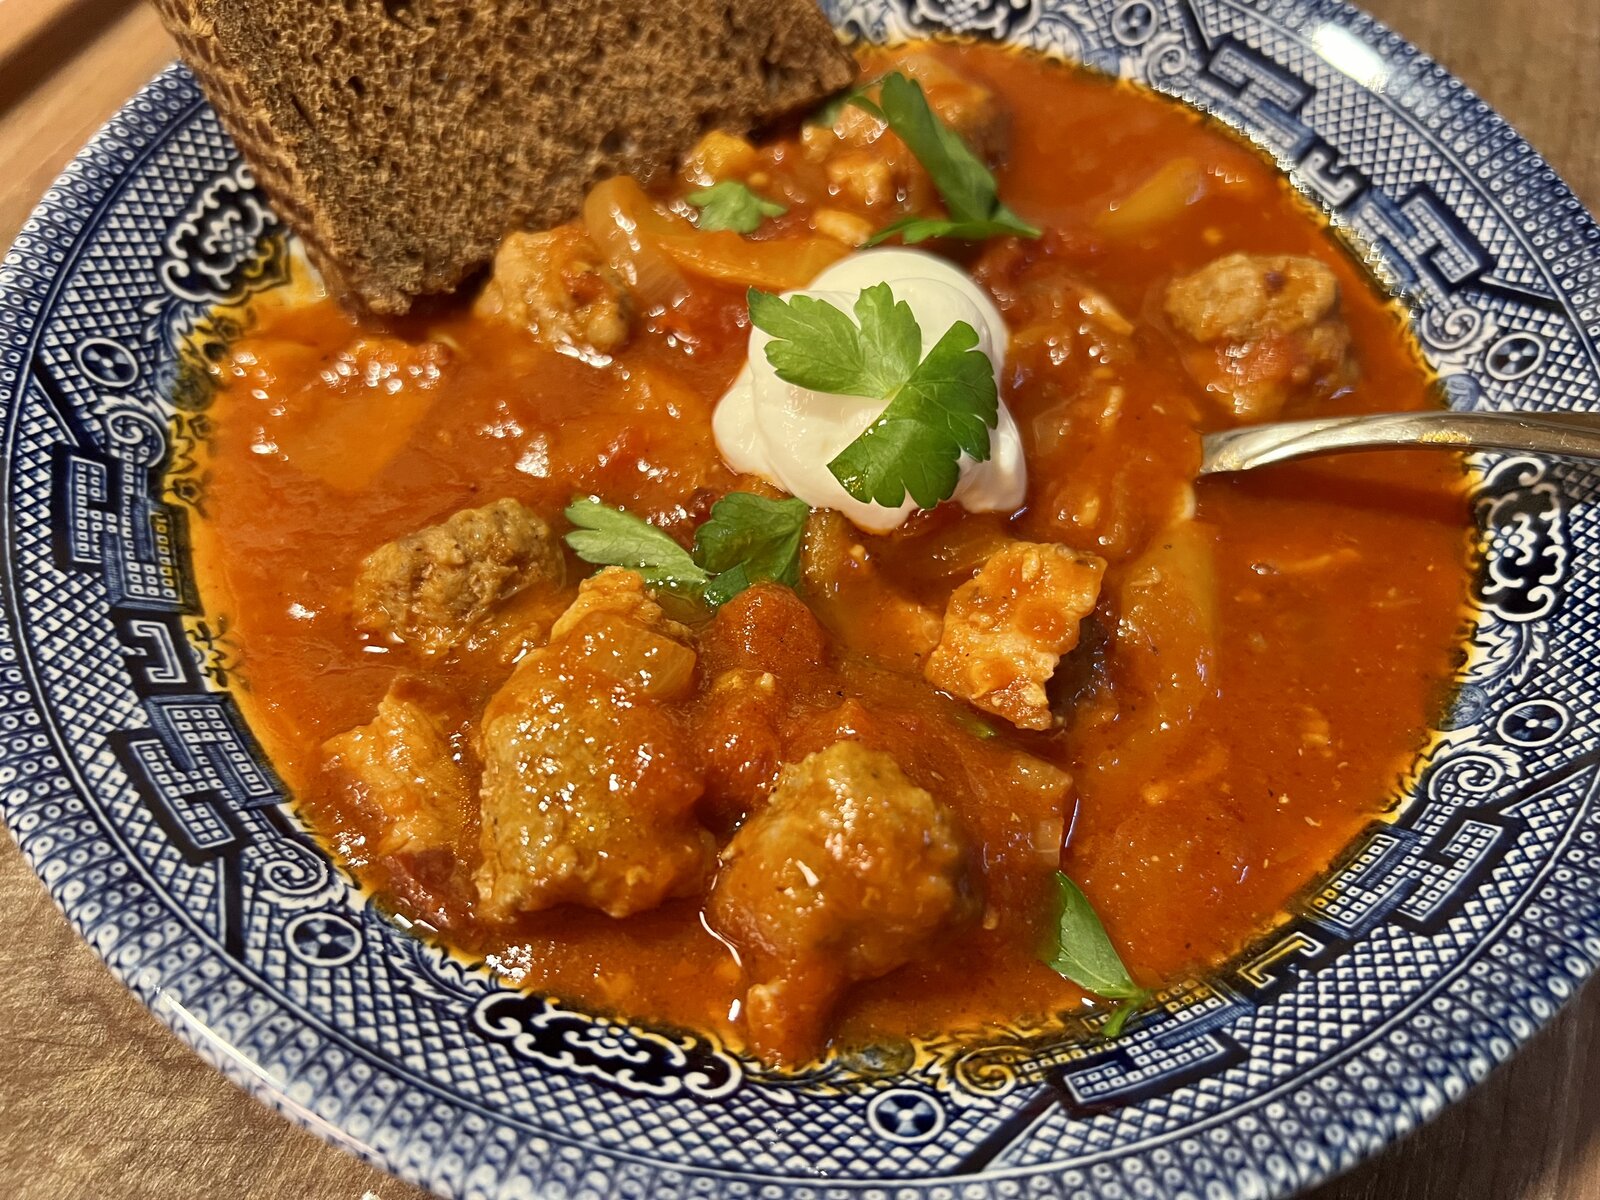 Hungarian Sausage Stew with Ale